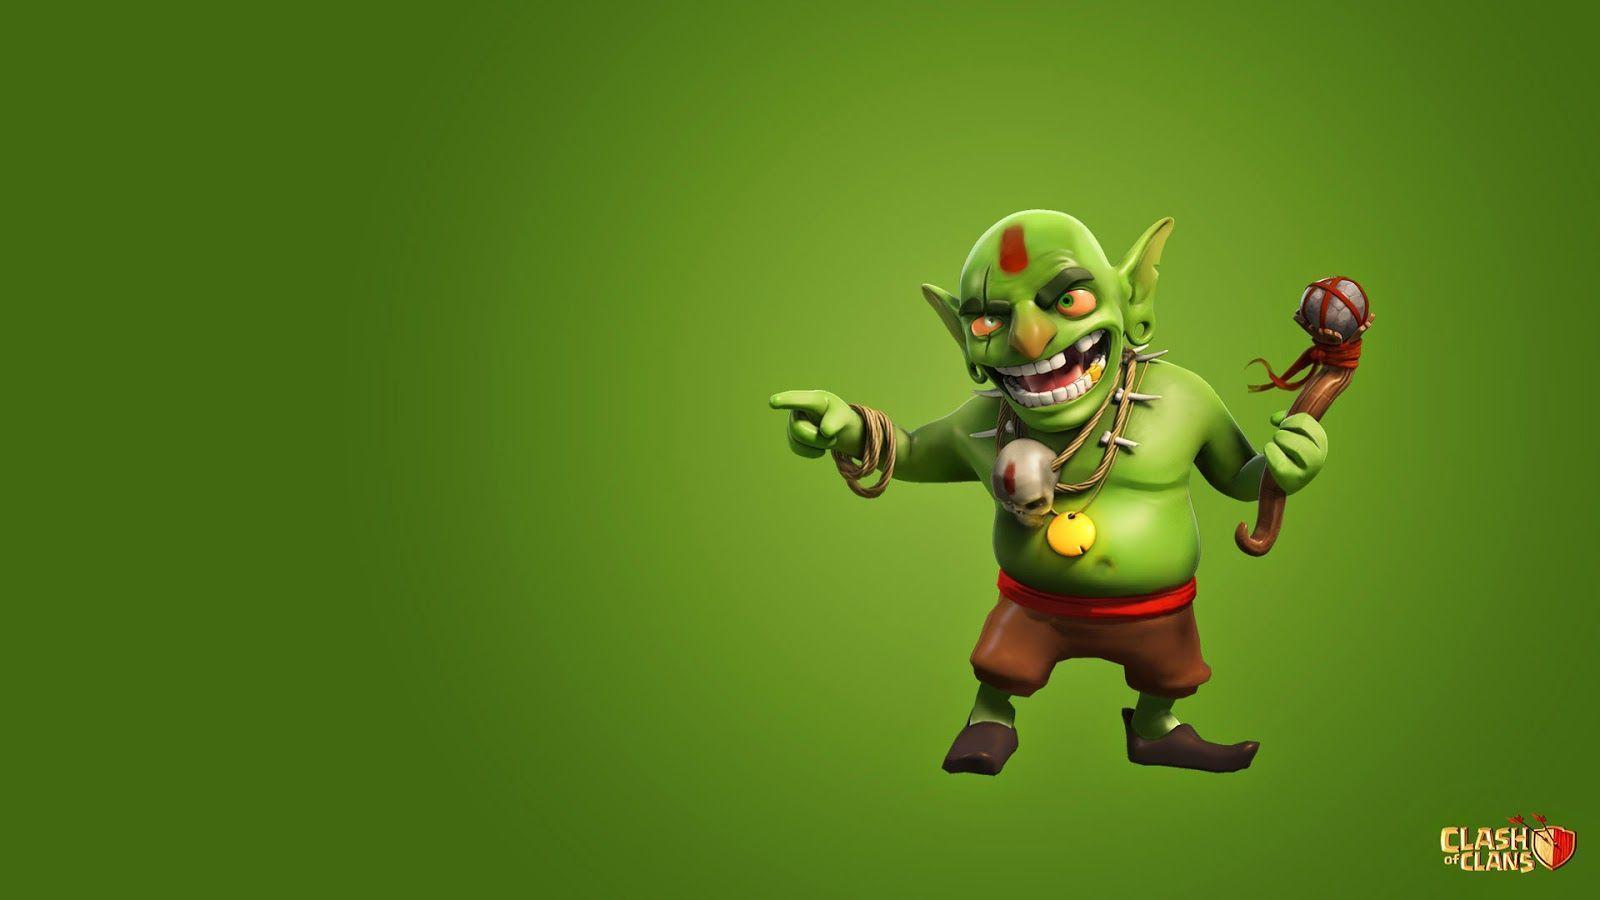 Clash Of Clans Laptop Wallpaper 4k, Clash Of Clans, Game